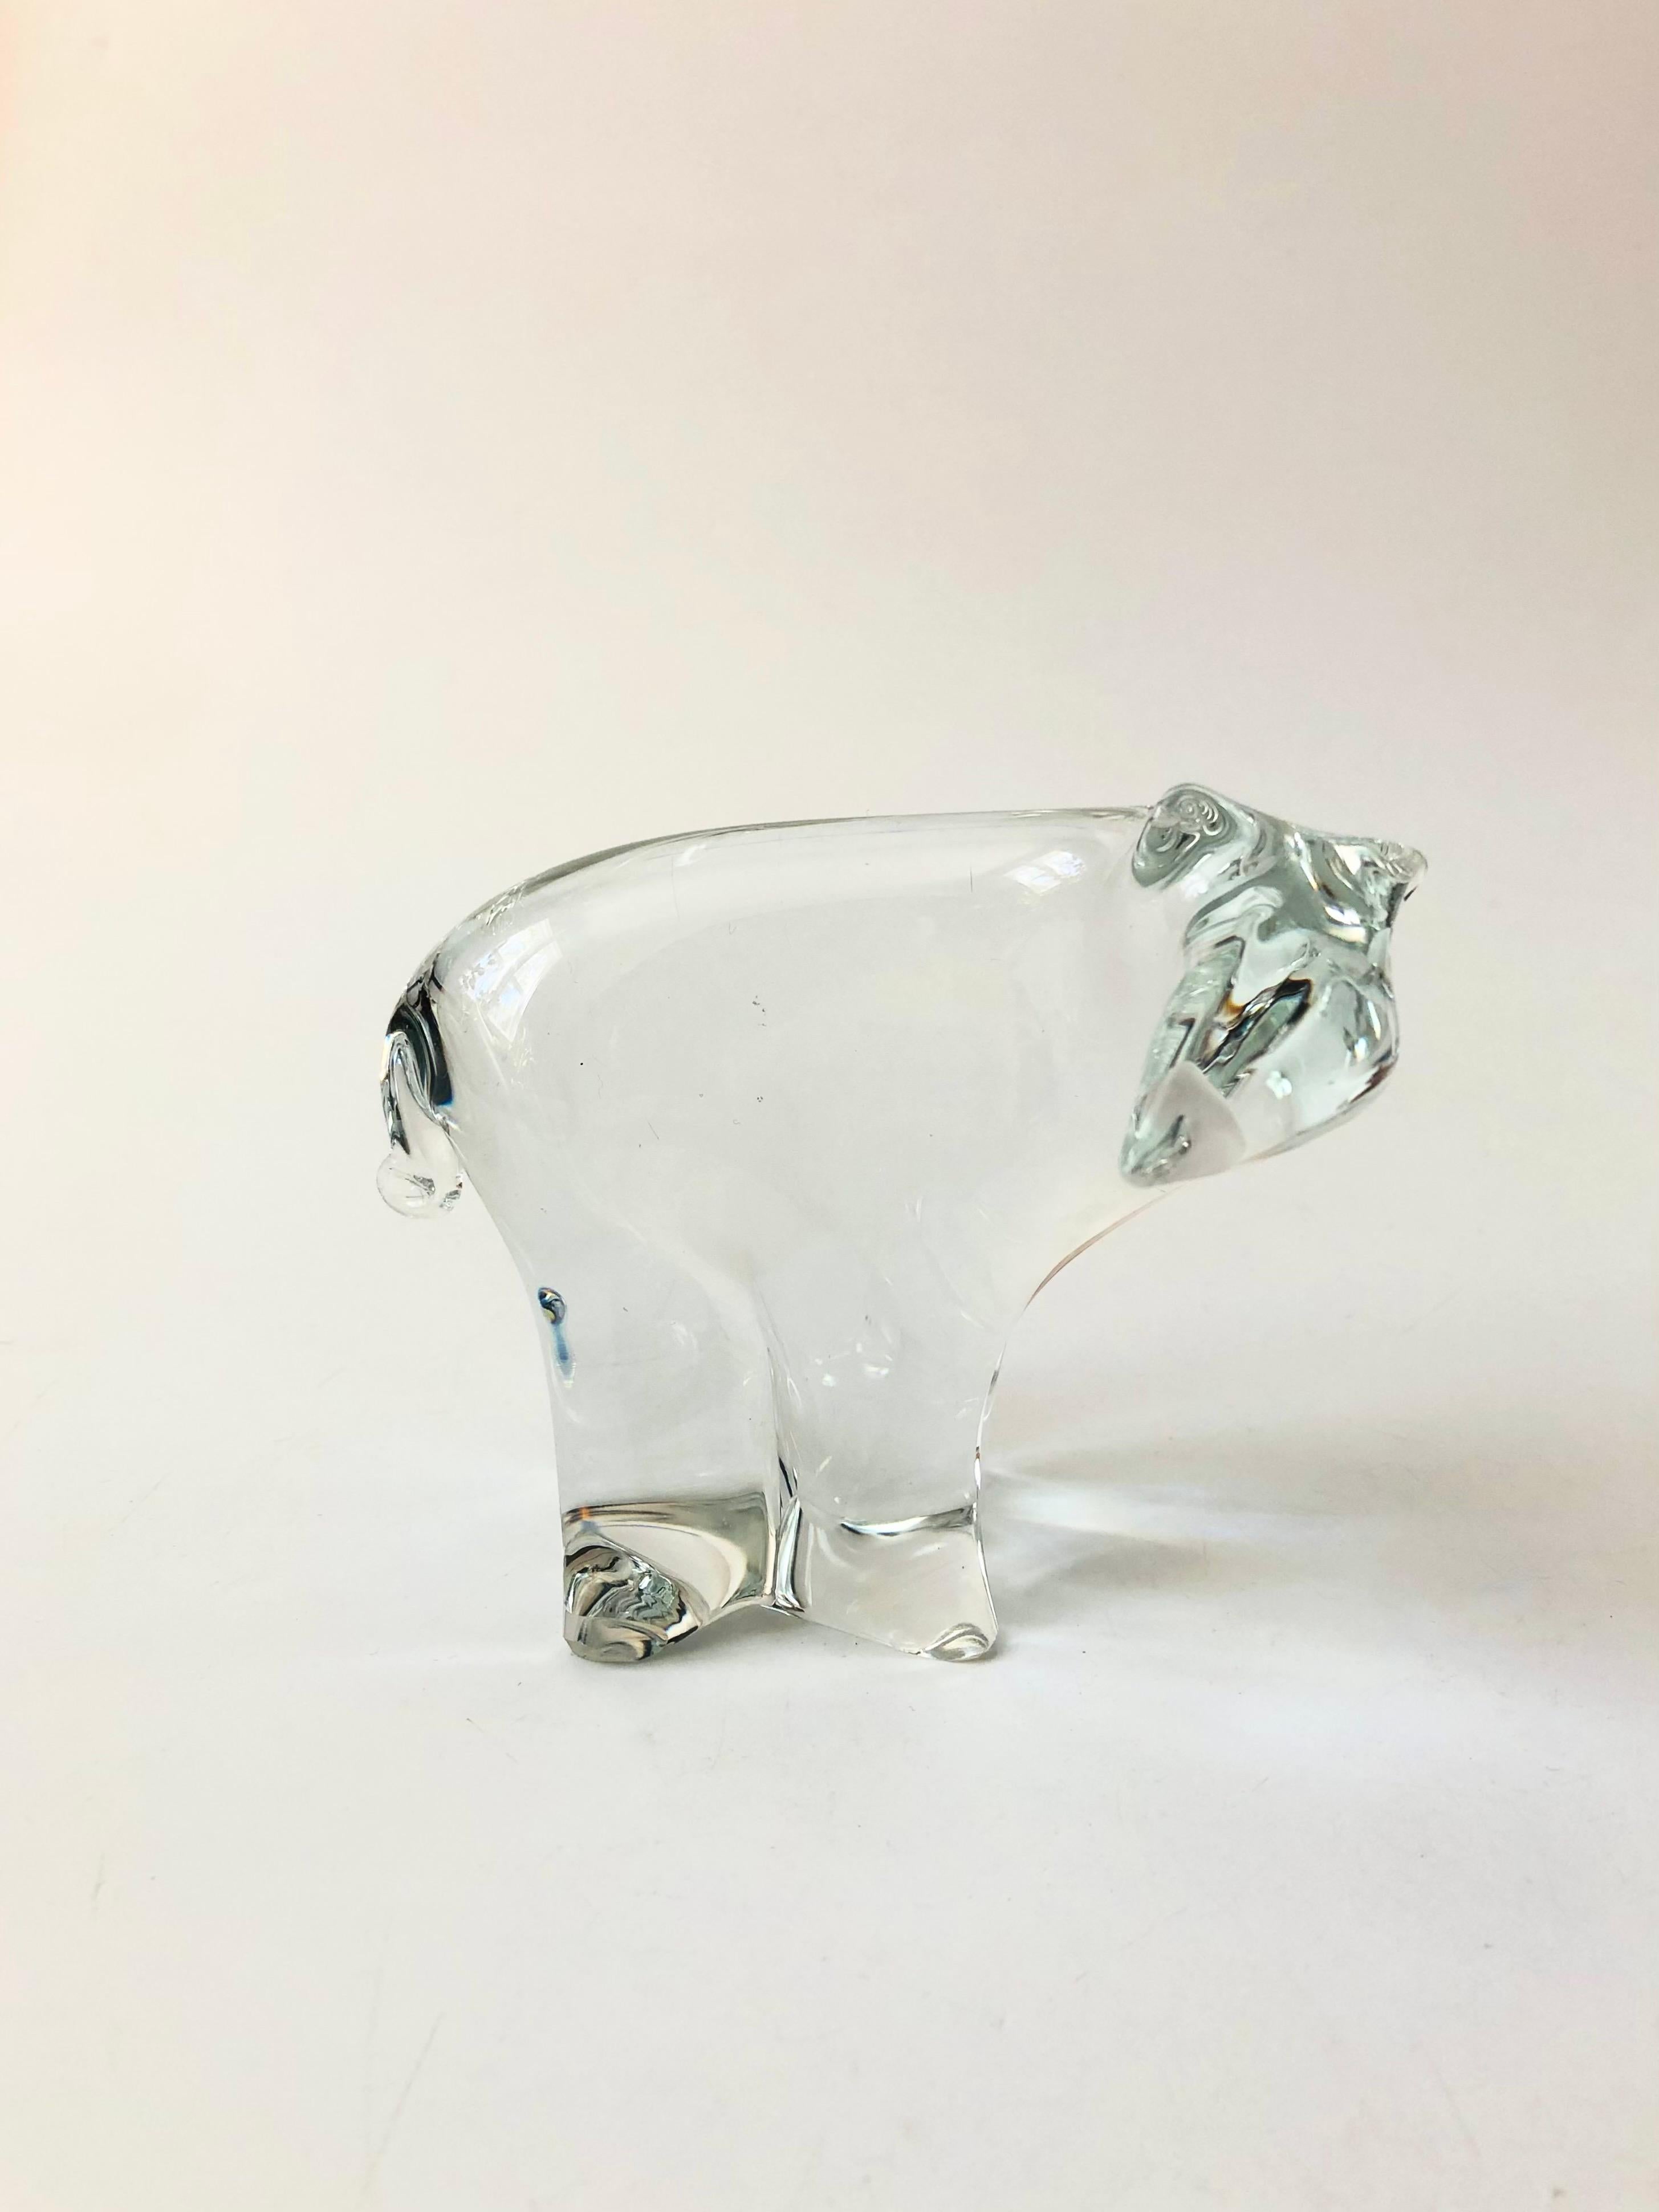 A vintage art glass polar bear. Nice simplified features in blown glass.